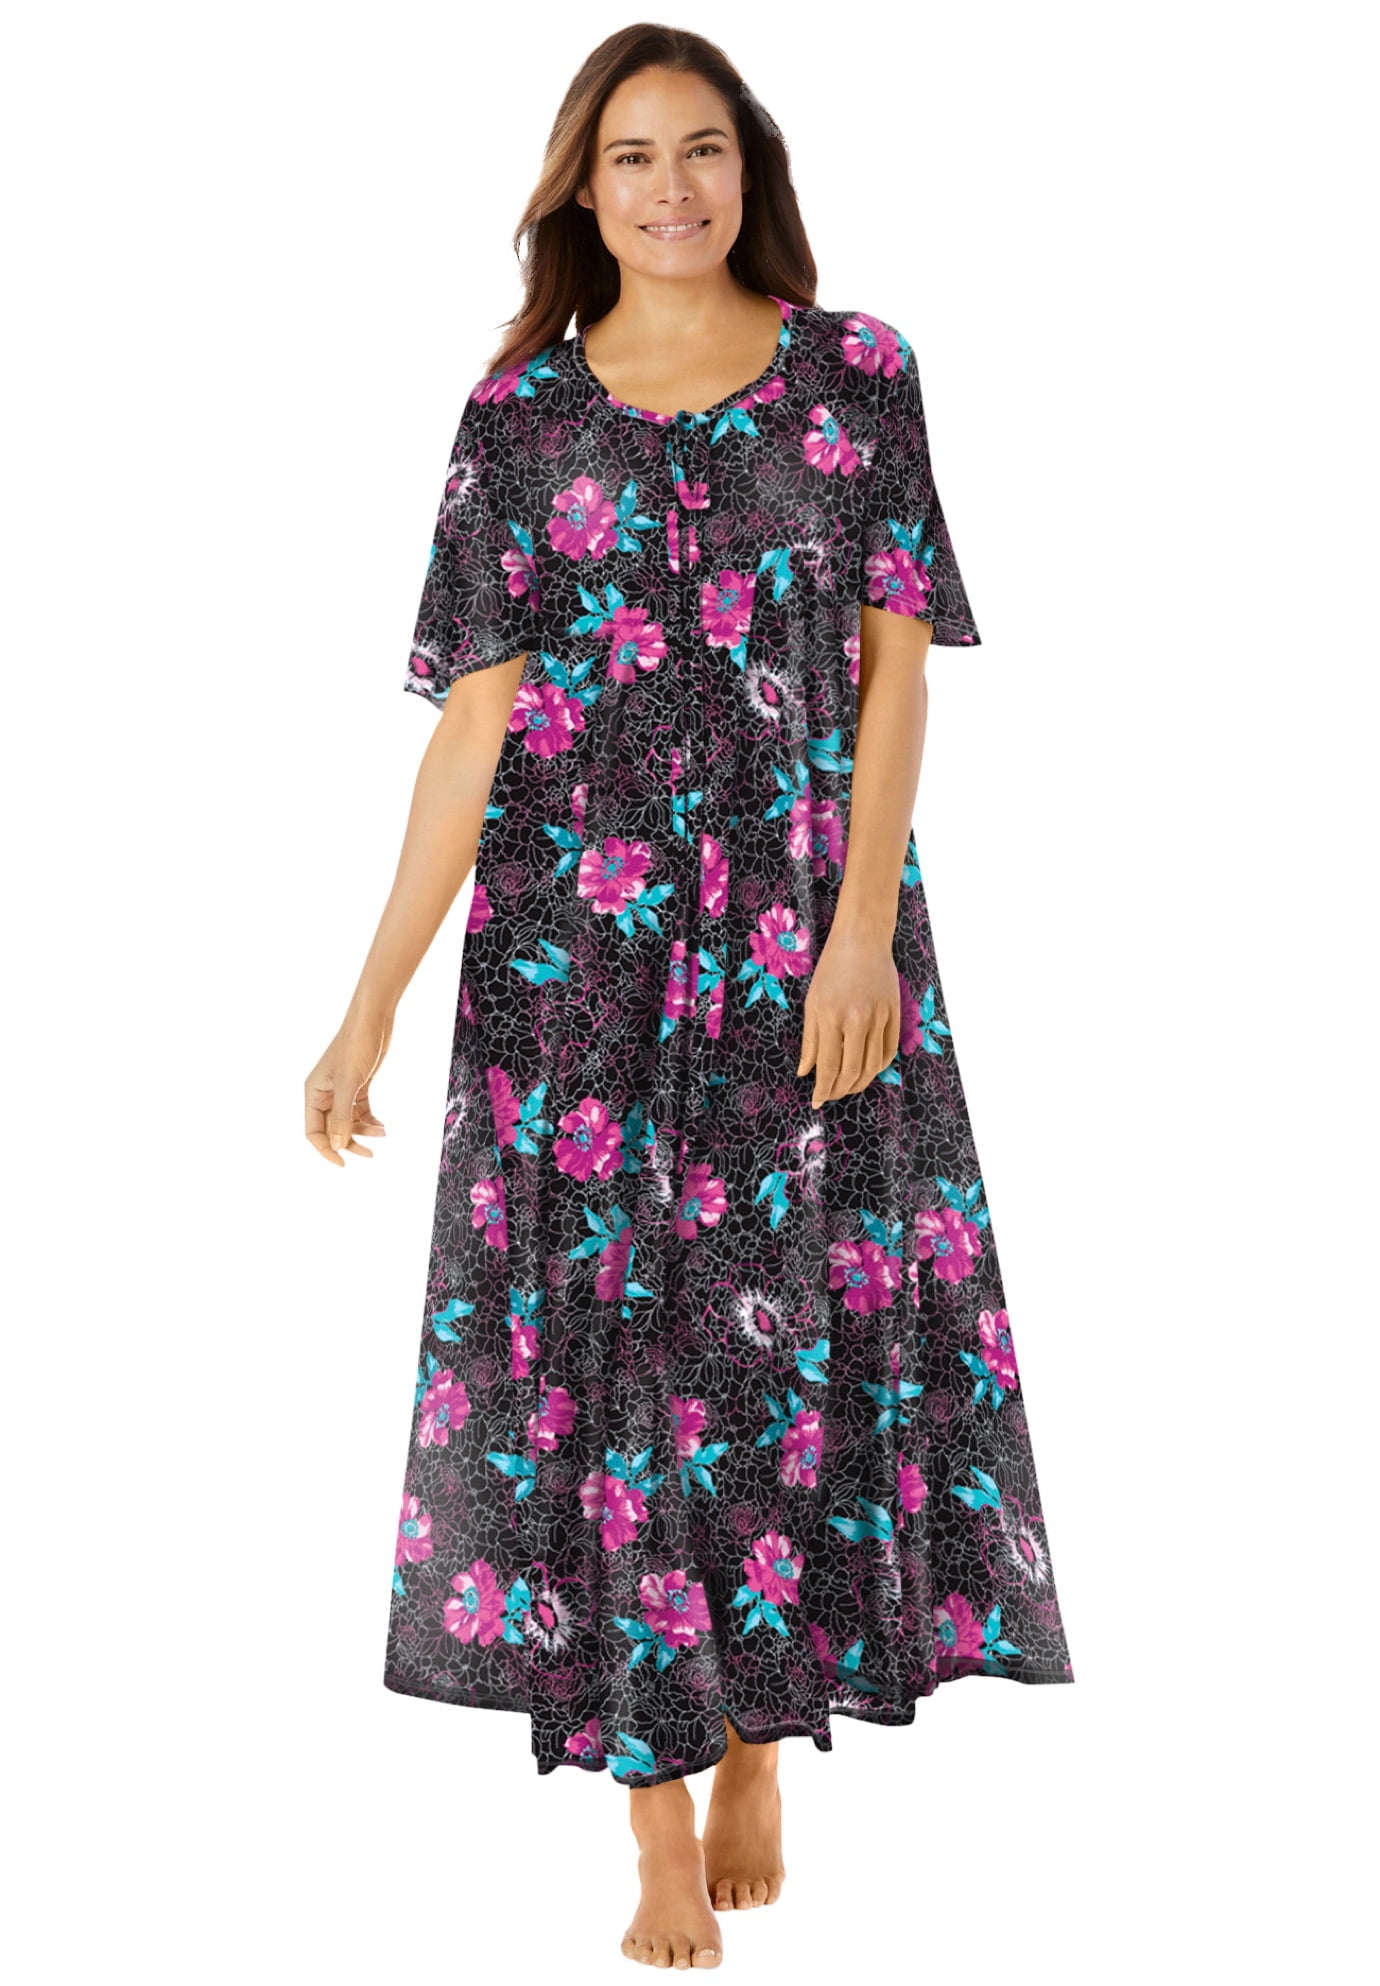 Only Necessities Women's Plus Size Sweeping Printed Dress or Nightgown ...